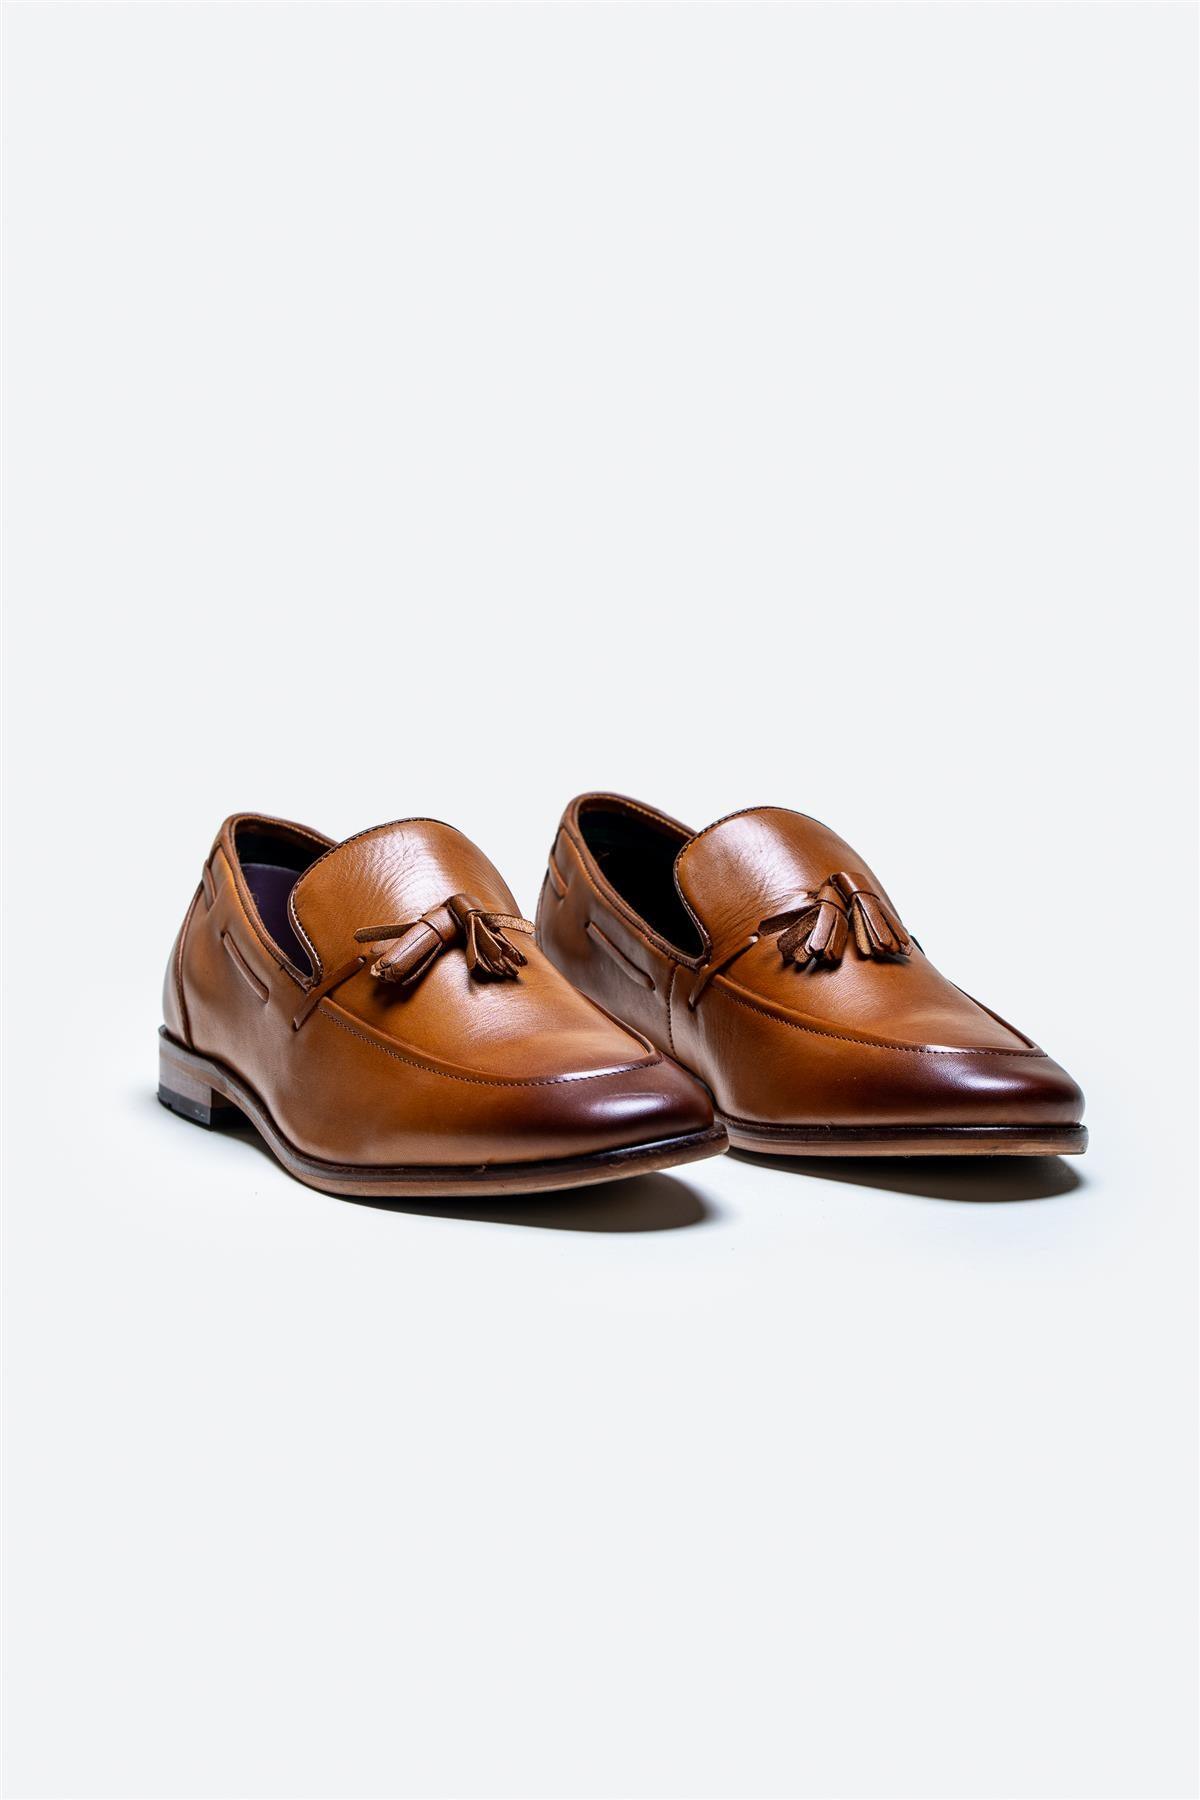 Freemont tan loafers front